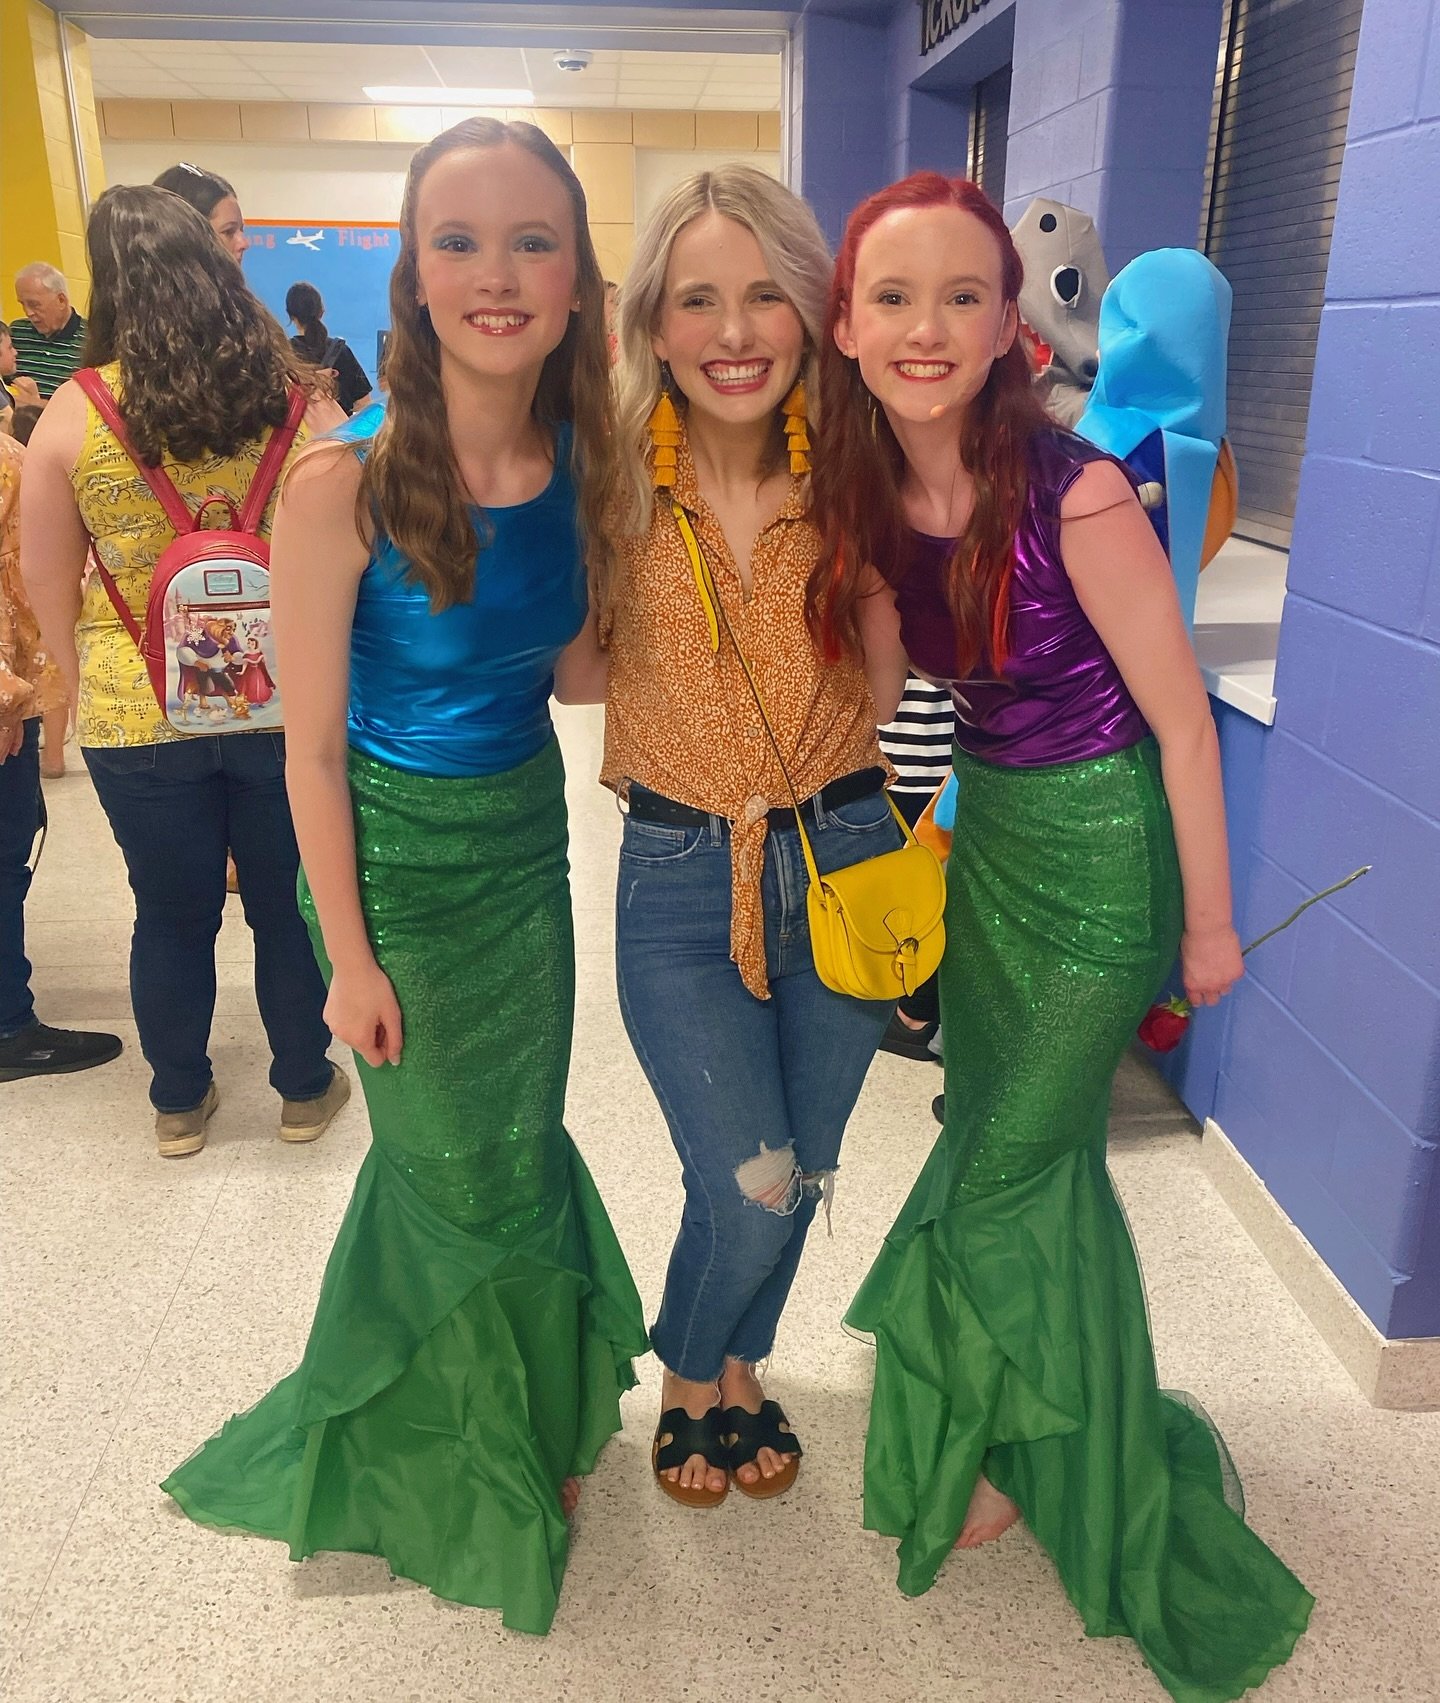 I loved seeing my favorite twins, Emery and Kennedy Cline, in their school production of The Little Mermaid Jr.! Kennedy played Ariel and Emery played Alanna, one of the mersisters! They were both absolutely captivating on stage and sounded gorgeous!